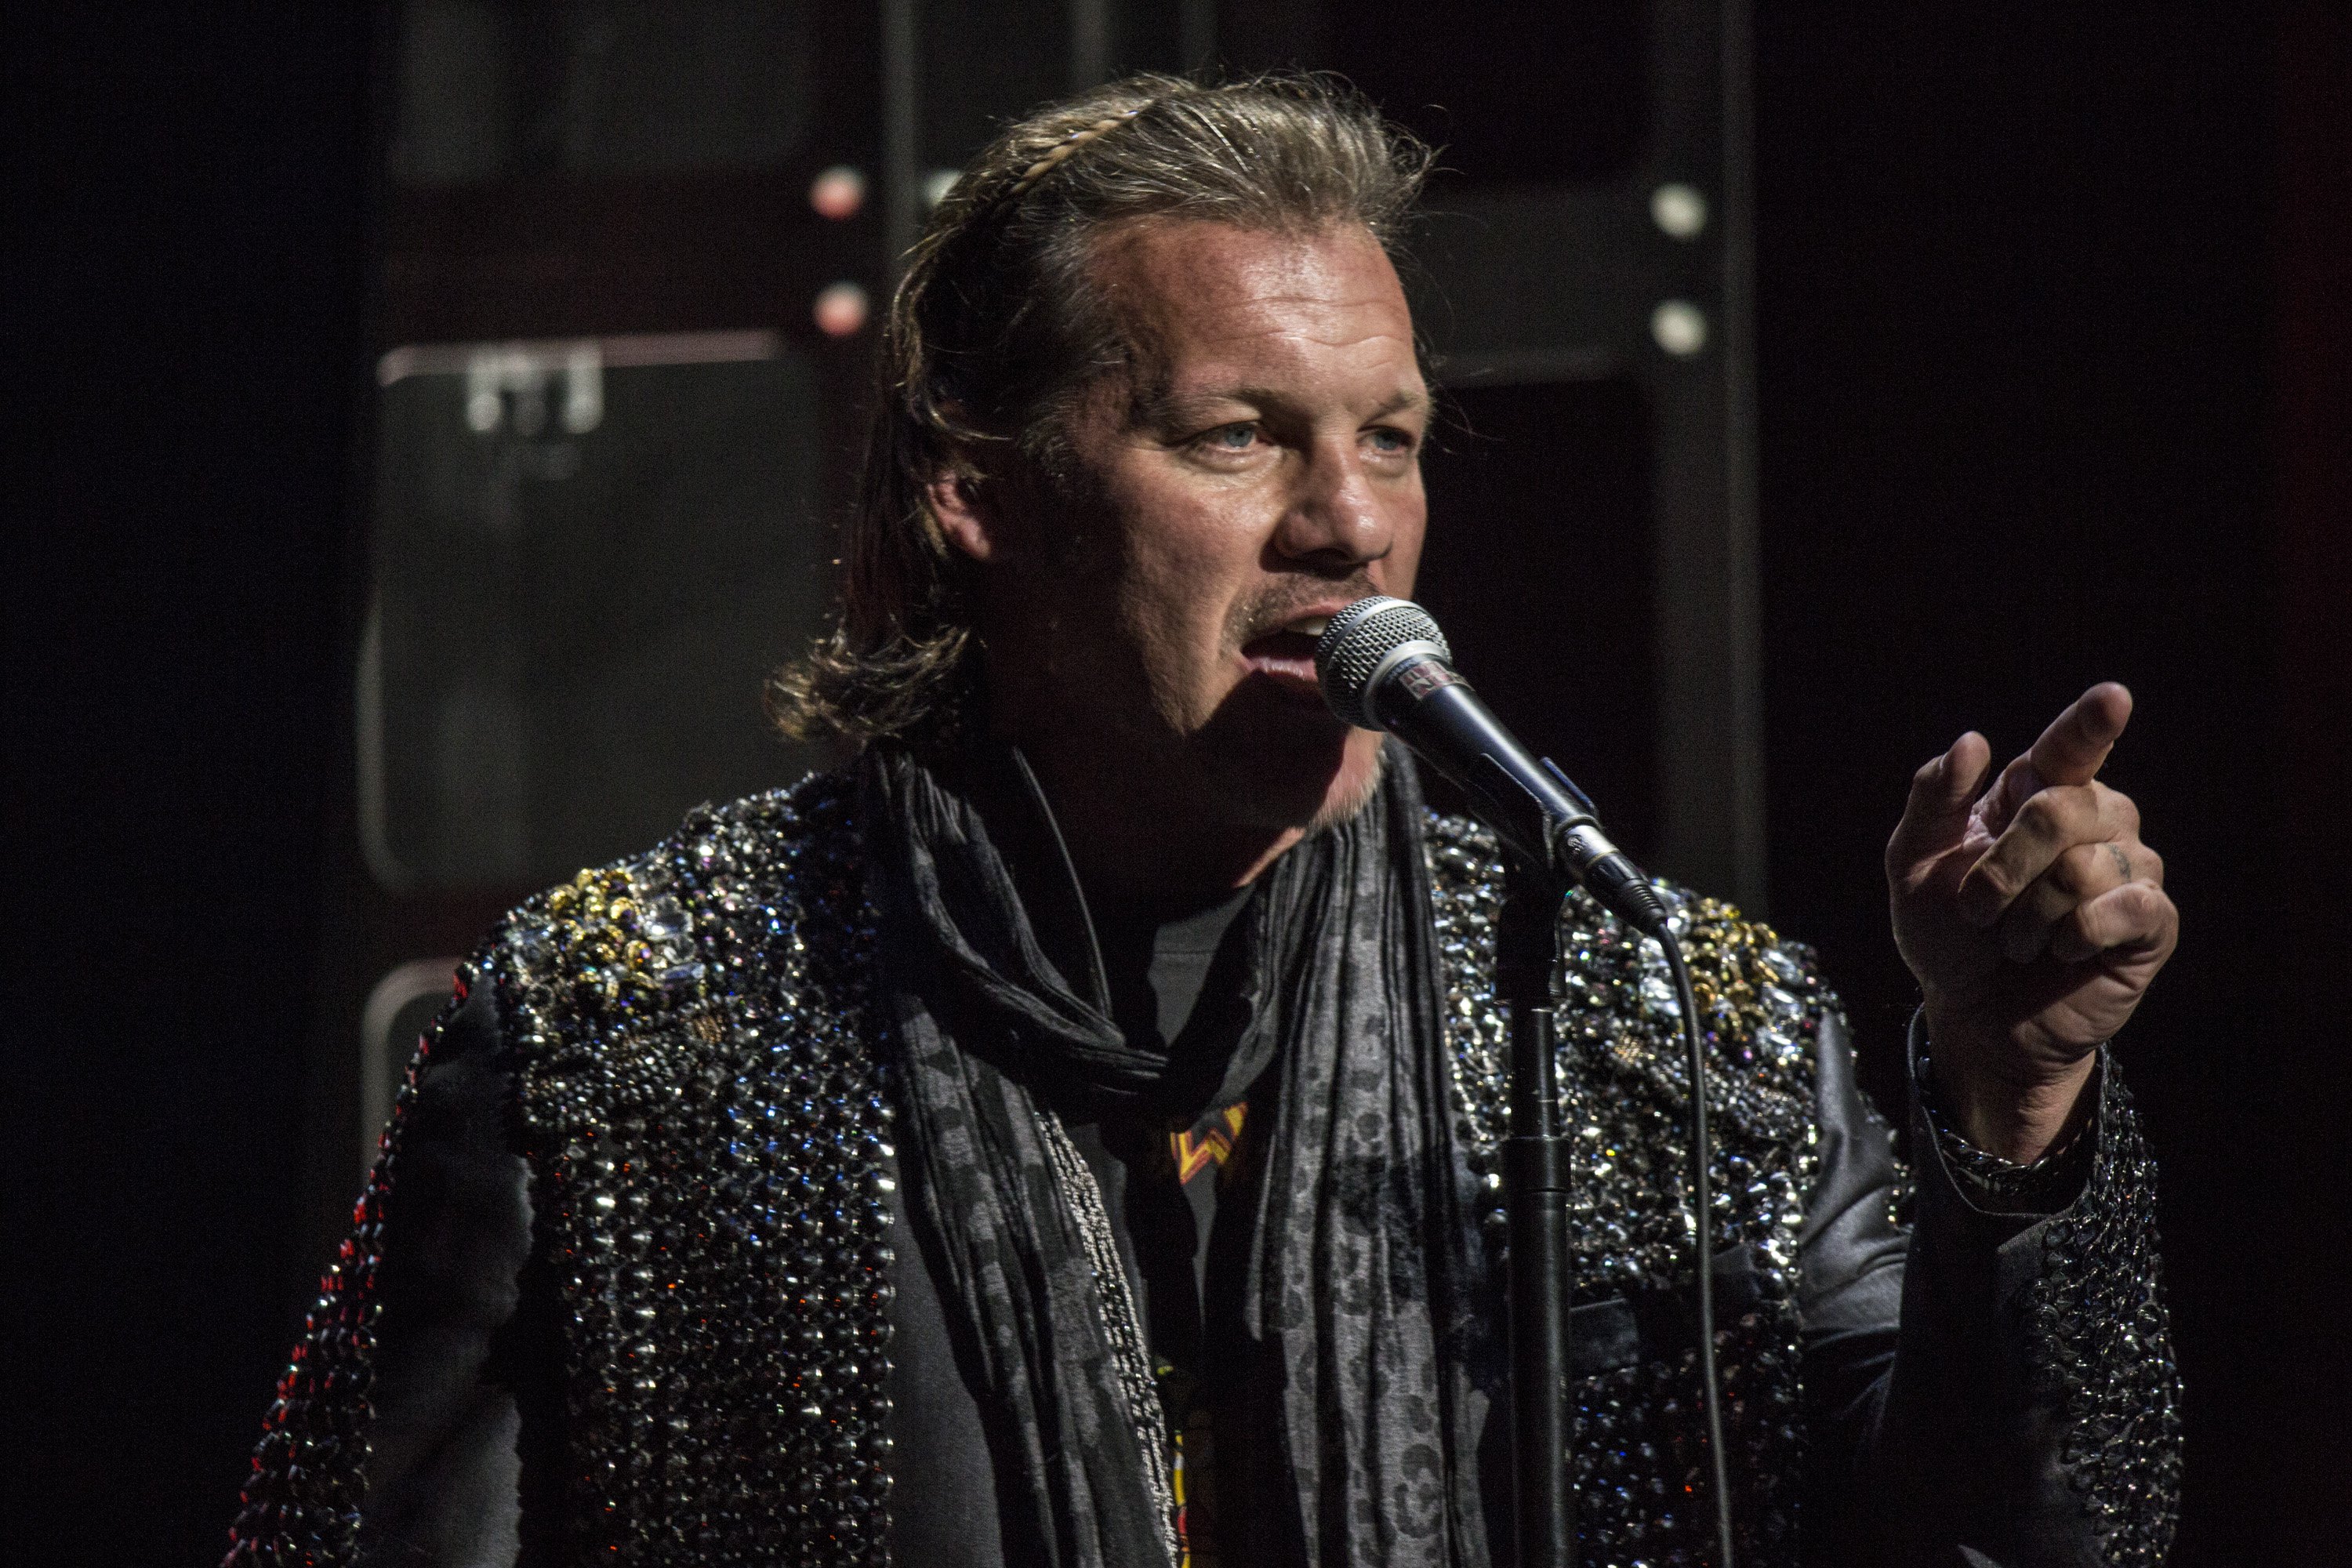 Chris Jericho Talks About The Freedom Of His WWE Contract, When He Realized He Wanted To Be A Singer